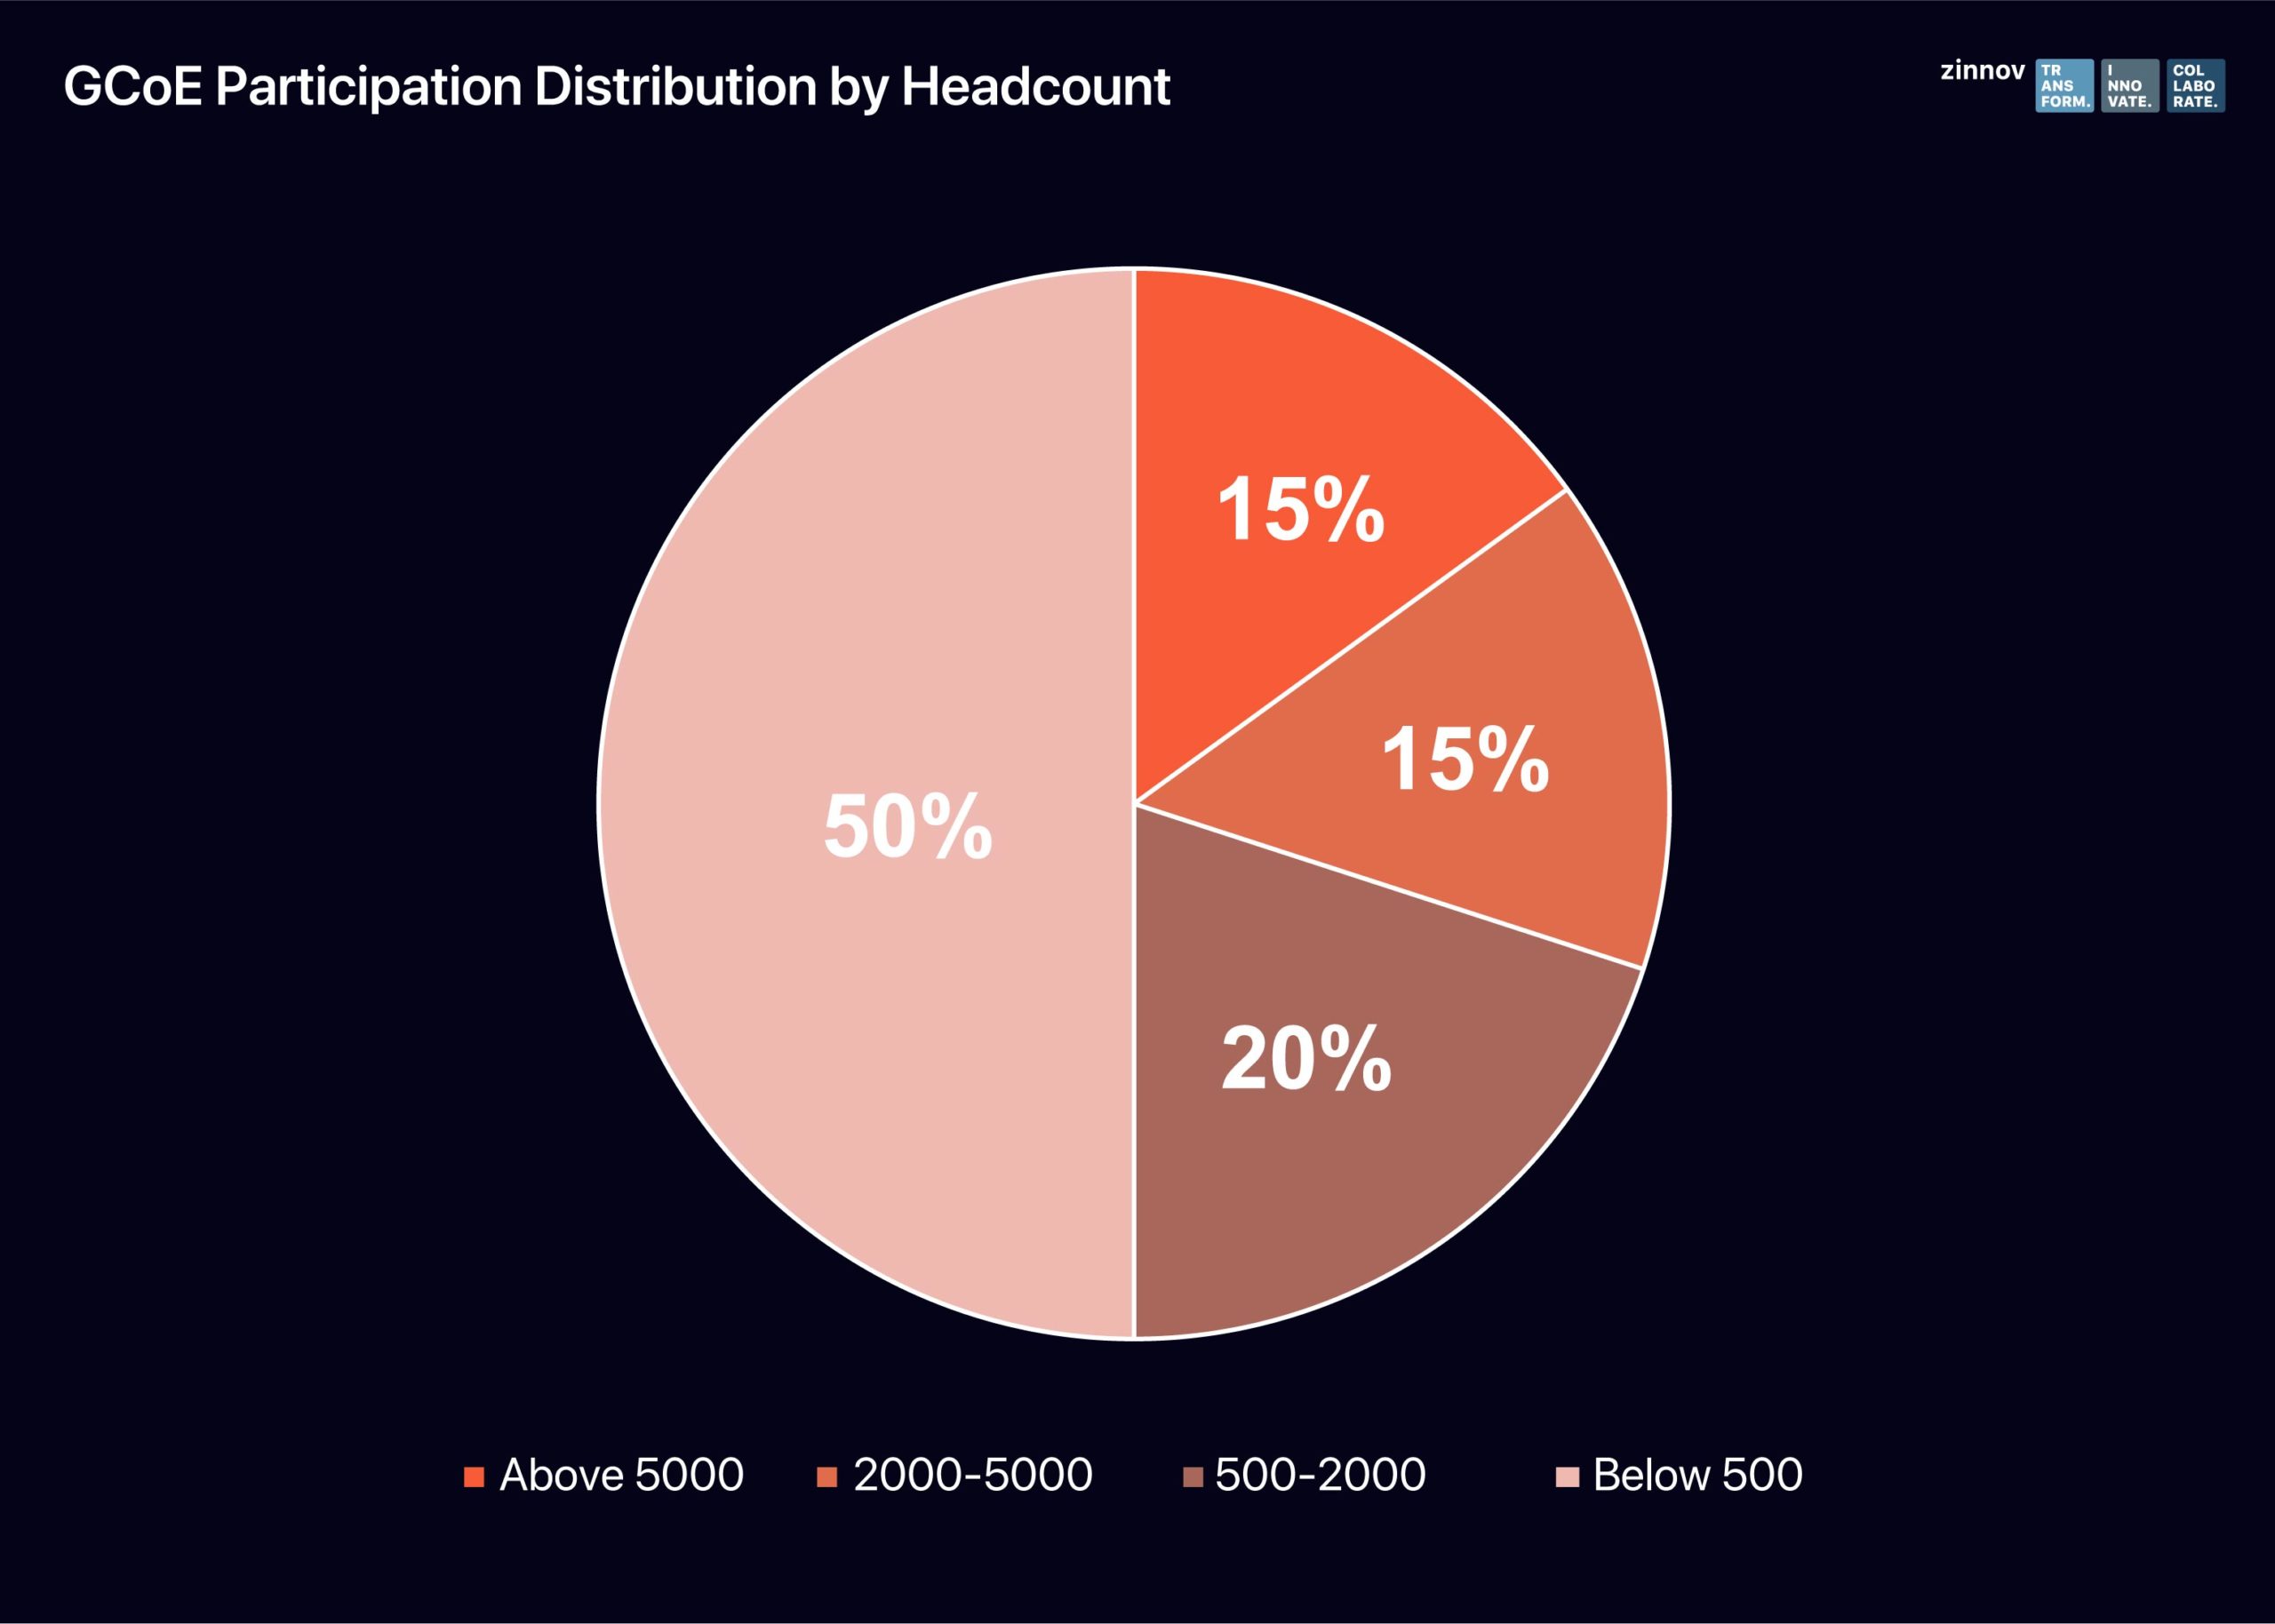 GCoE participation distribution by headcount